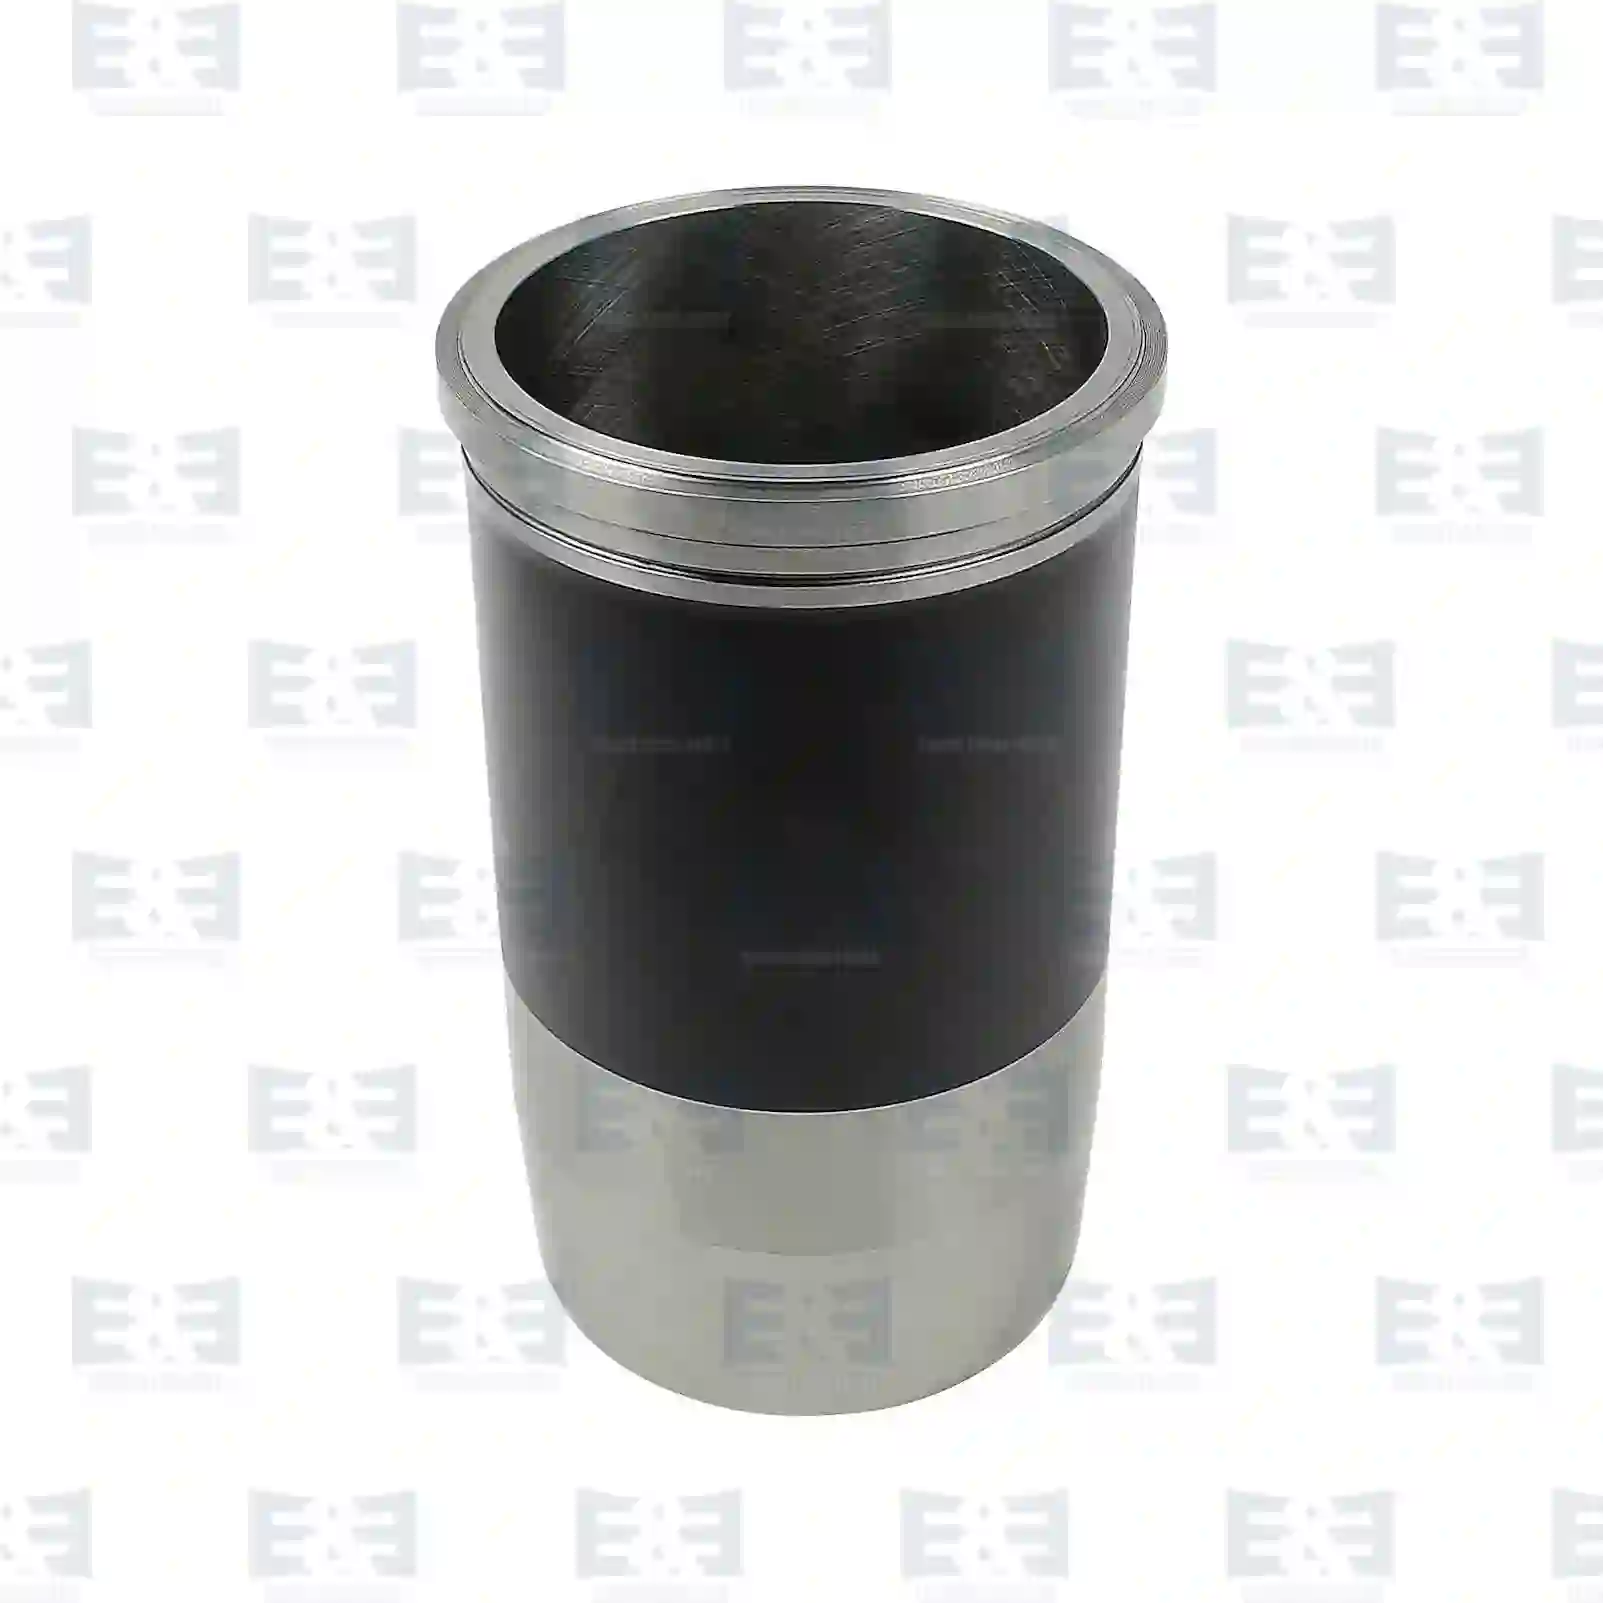 Cylinder liner, without seal rings, 2E2209685, 51012010306, 4420110210, 4440110110, 4440110210 ||  2E2209685 E&E Truck Spare Parts | Truck Spare Parts, Auotomotive Spare Parts Cylinder liner, without seal rings, 2E2209685, 51012010306, 4420110210, 4440110110, 4440110210 ||  2E2209685 E&E Truck Spare Parts | Truck Spare Parts, Auotomotive Spare Parts